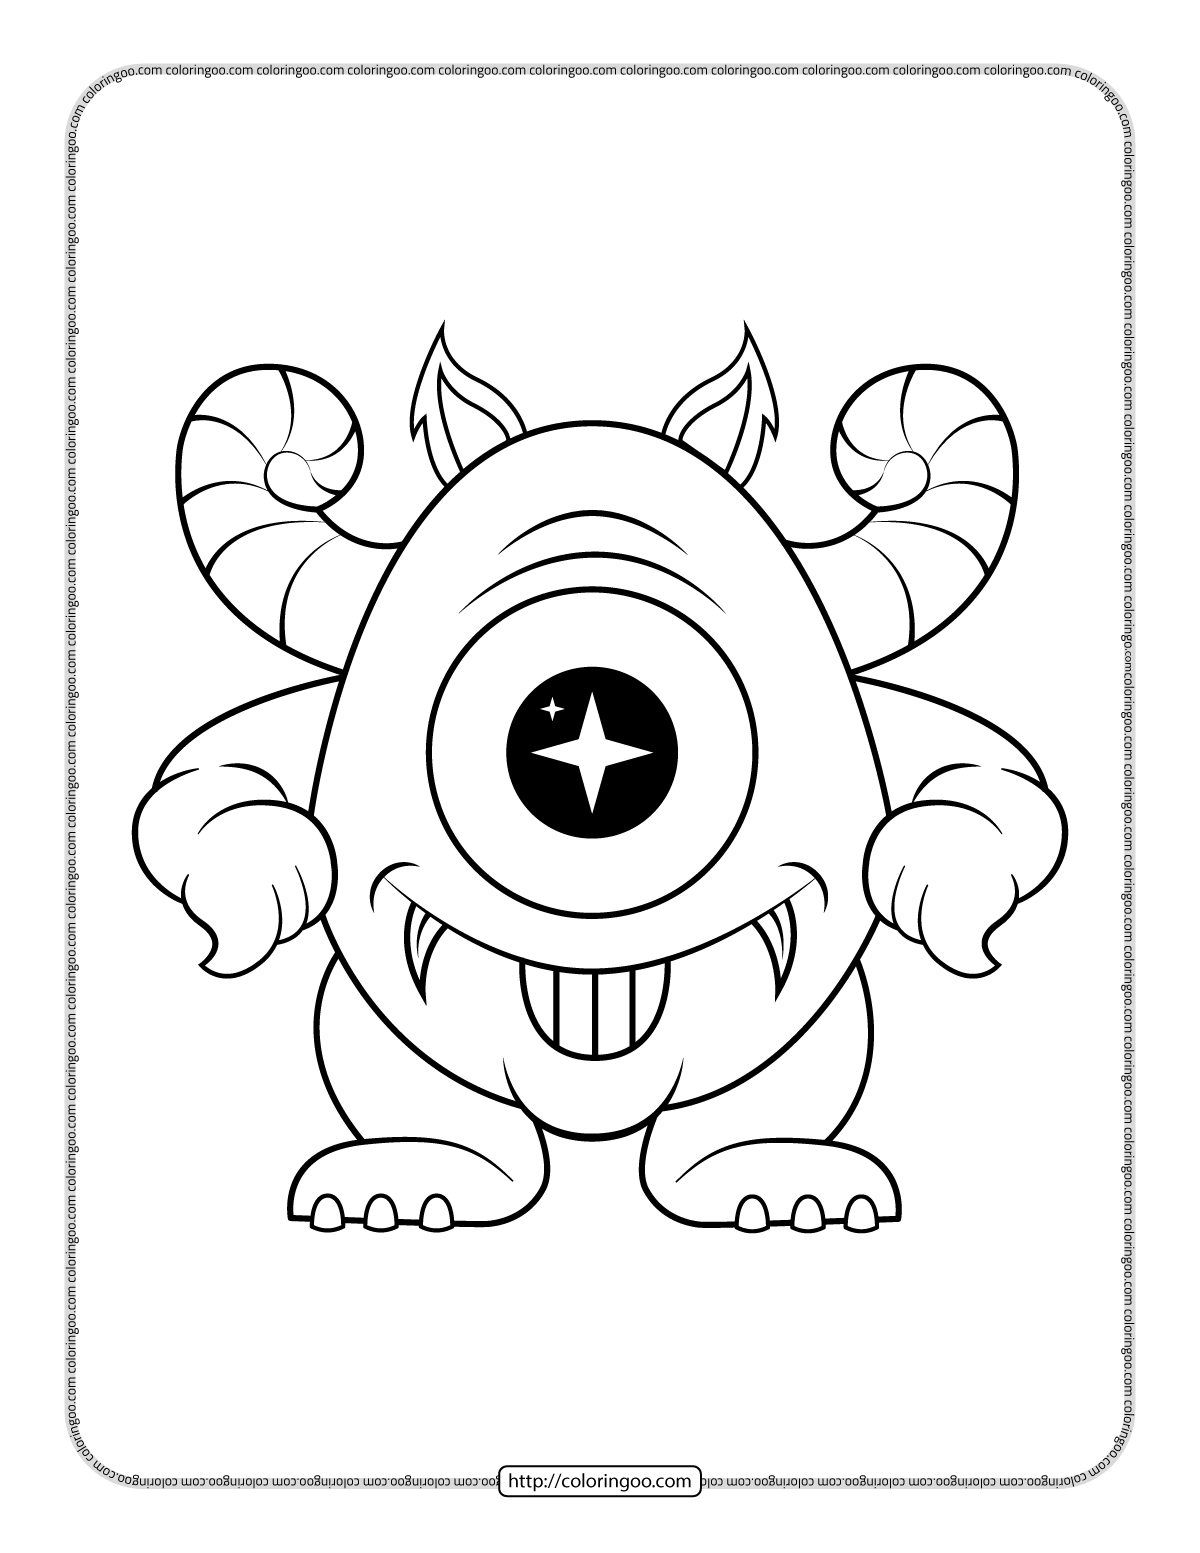 star eyed monster coloring page